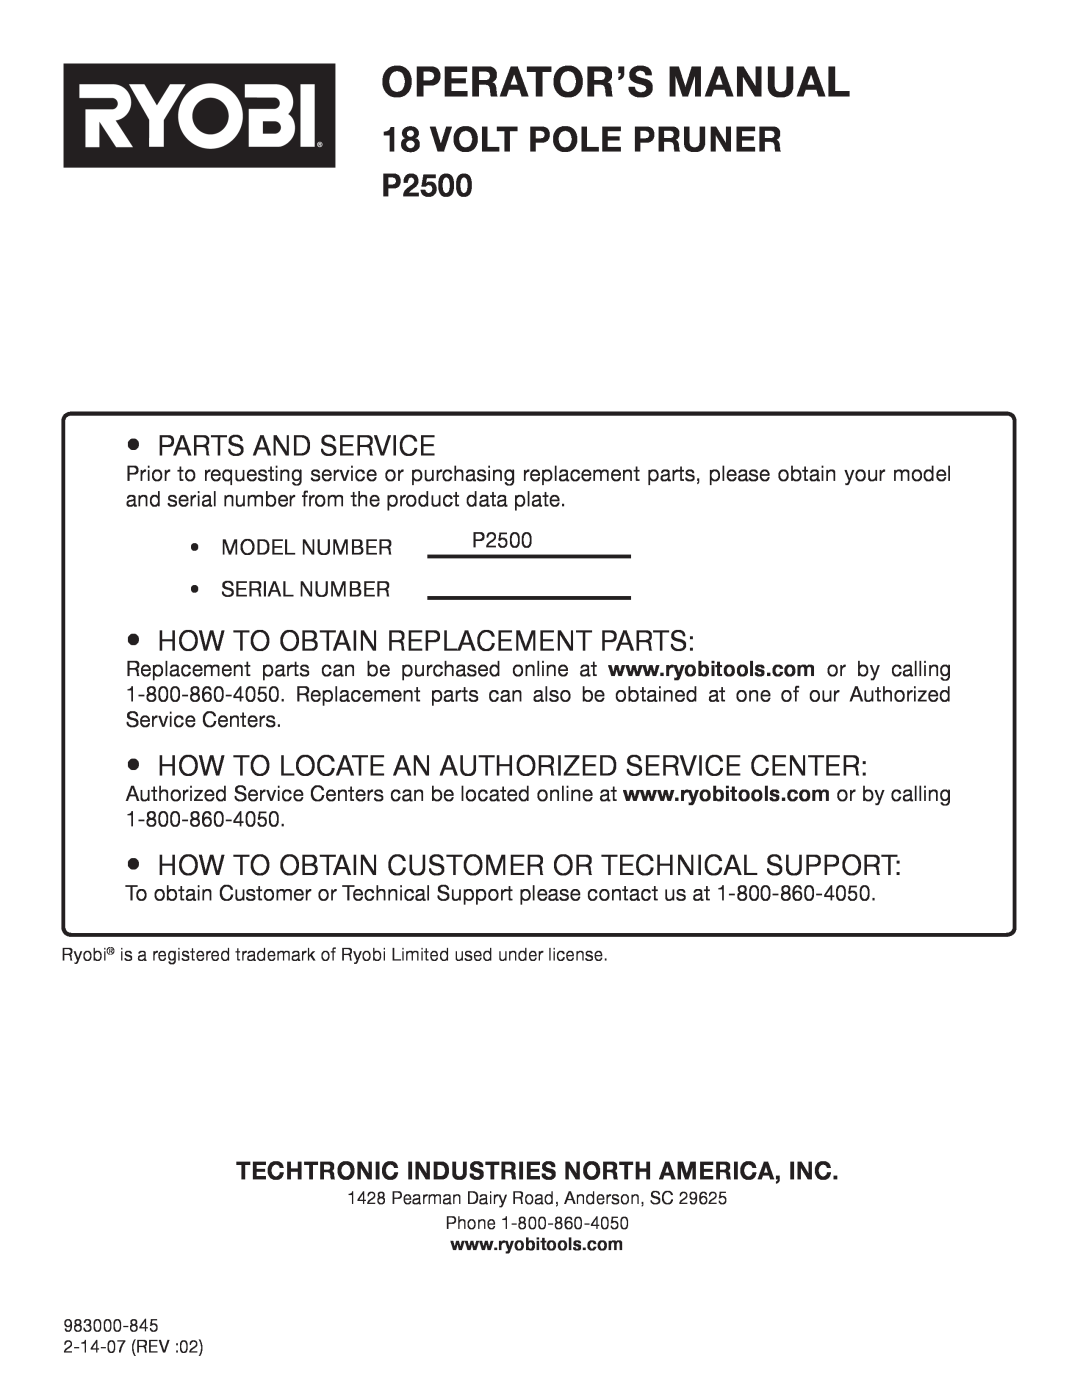 Ryobi P2500 manual Techtronic Industries North America, Inc, Operator’S Manual, Volt Pole Pruner, Parts And Service 